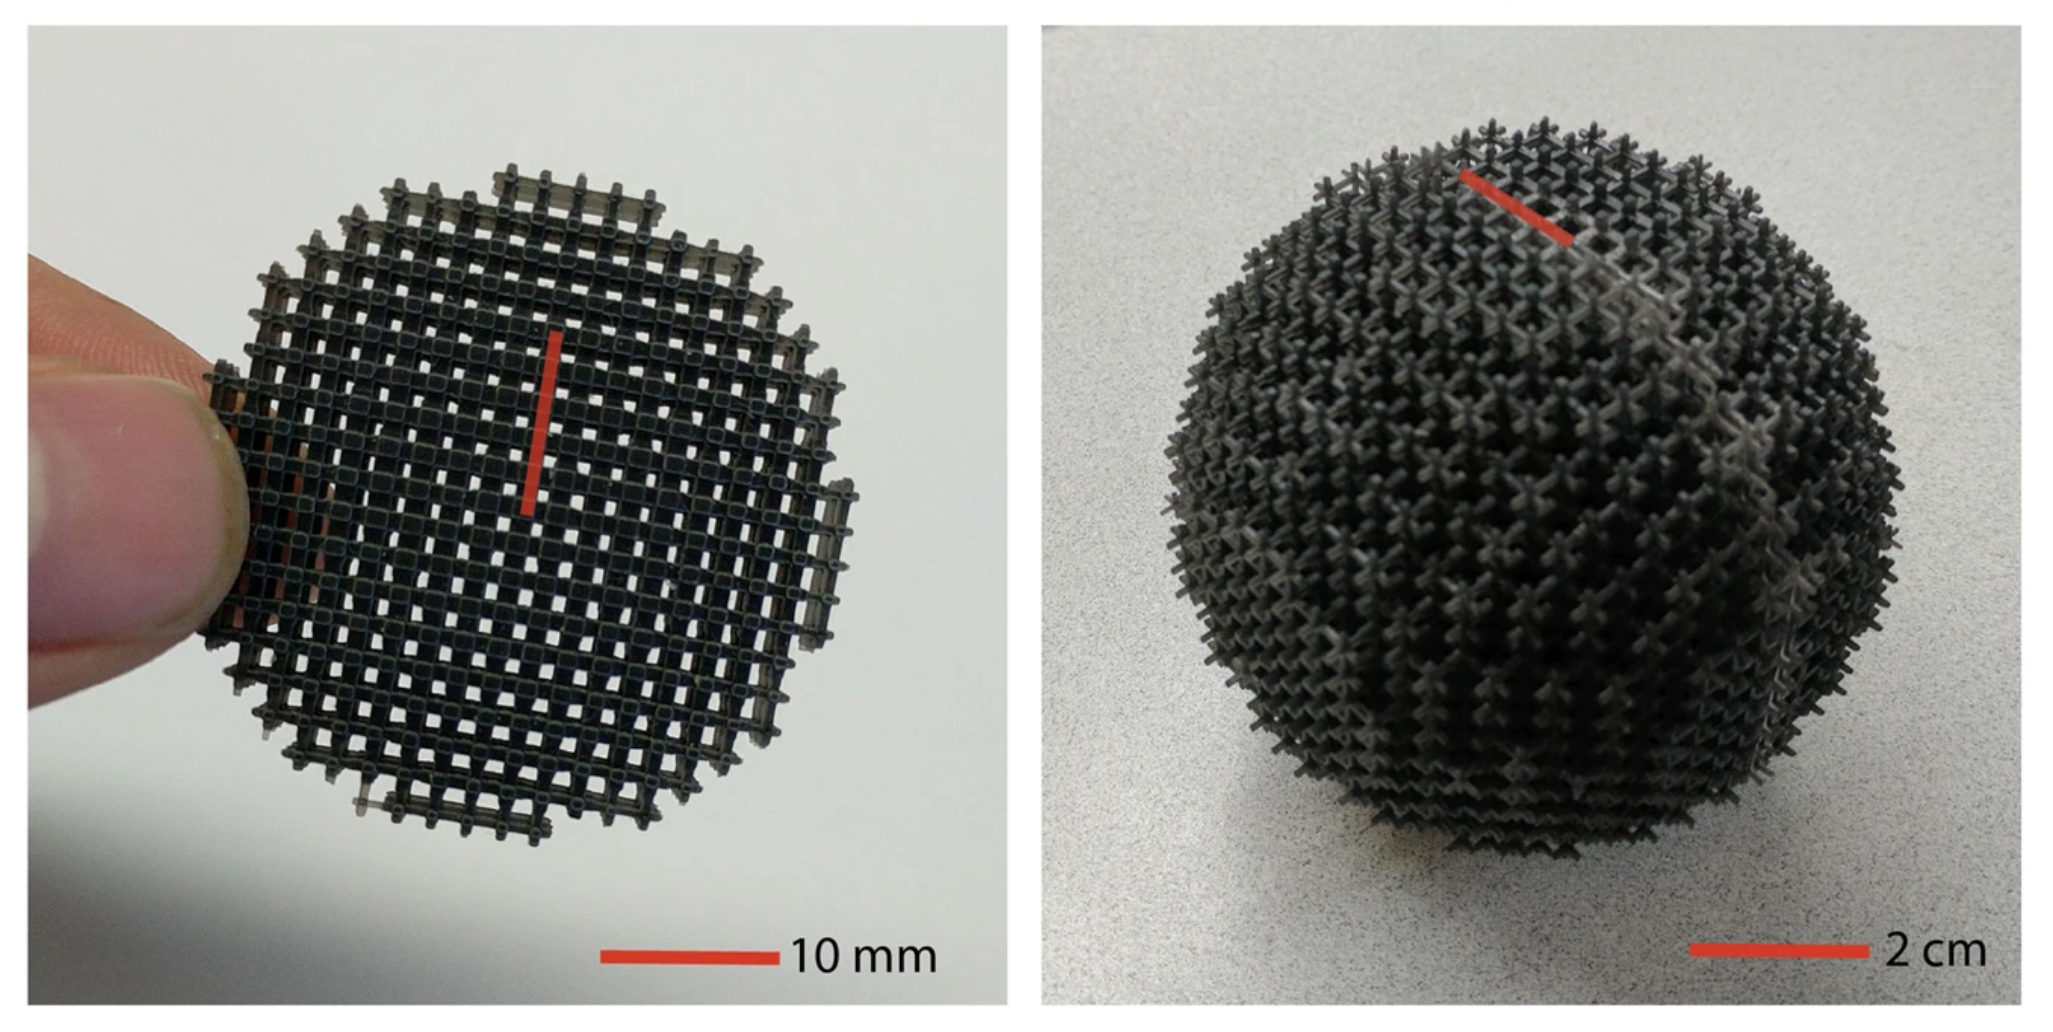 Photos of the two proof-of-principle acoustic Luneberg lenses described by the inventors. (Source: cropped Figure 1 from Xie, Y., Fu, Y., Jia, Z. et al. Acoustic Imaging with Metamaterial Luneburg Lenses. Sci Rep 8, 16188 (2018). https://doi.org/10.1038/s41598-018-34581-7. To view a copy of this license, visit http://creativecommons.org/licenses/by/4.0/.)